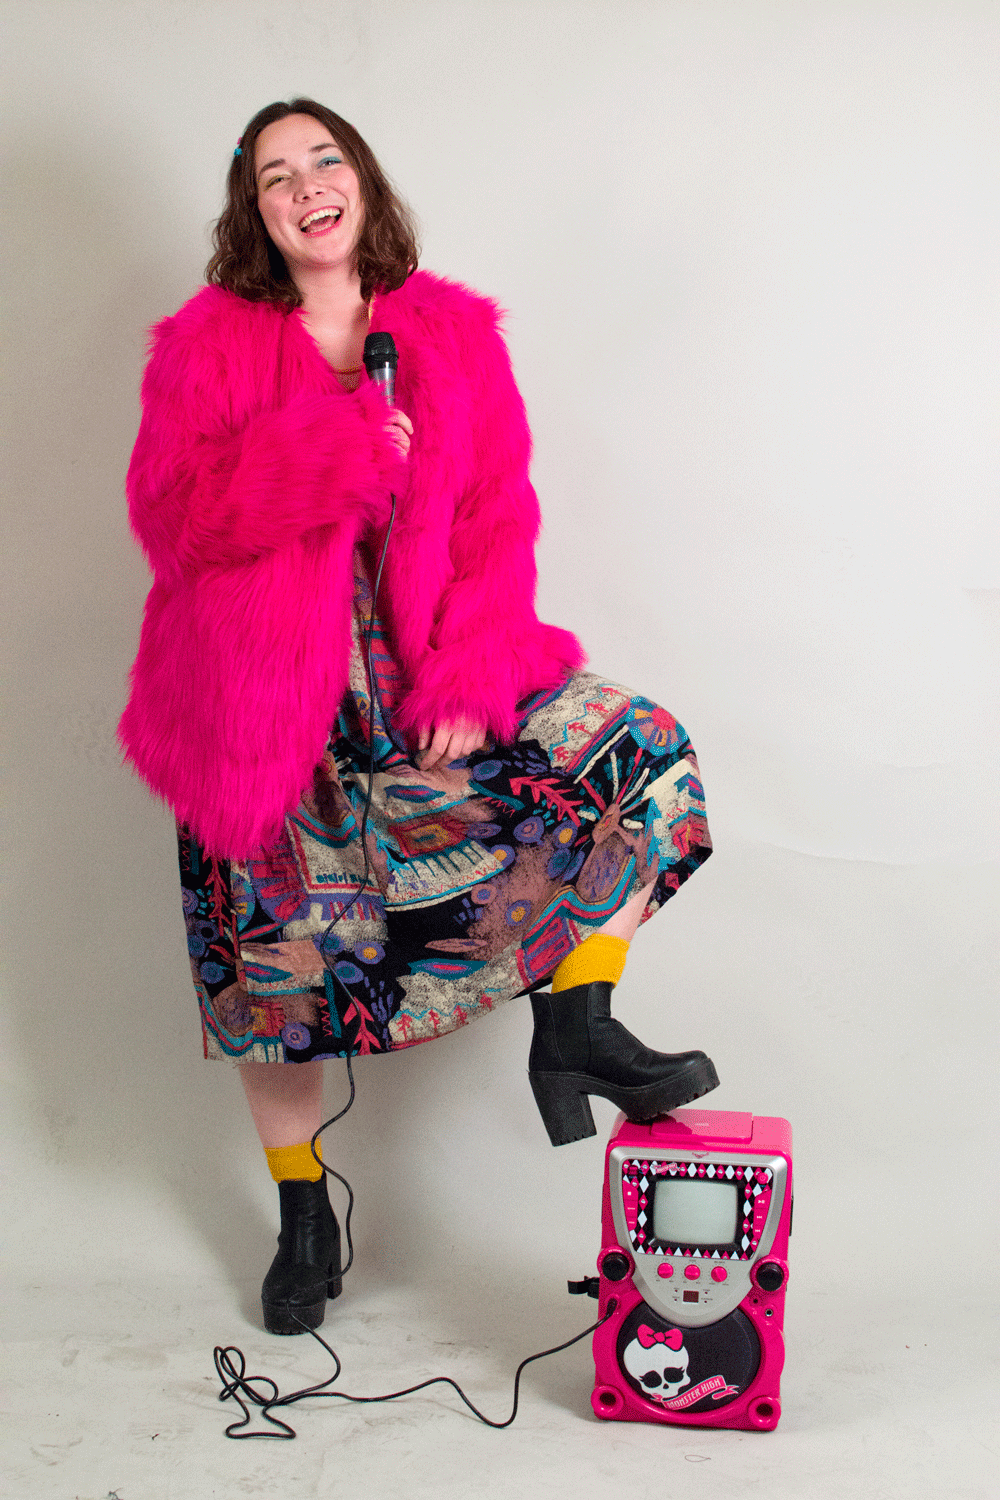 a picture of violet wearing a skirt, yellow socks, platform boots, and a bright pink faux fur coat. she's smiling and holding a microphone and one foot is resting on a monster high-branded karaoke machine.